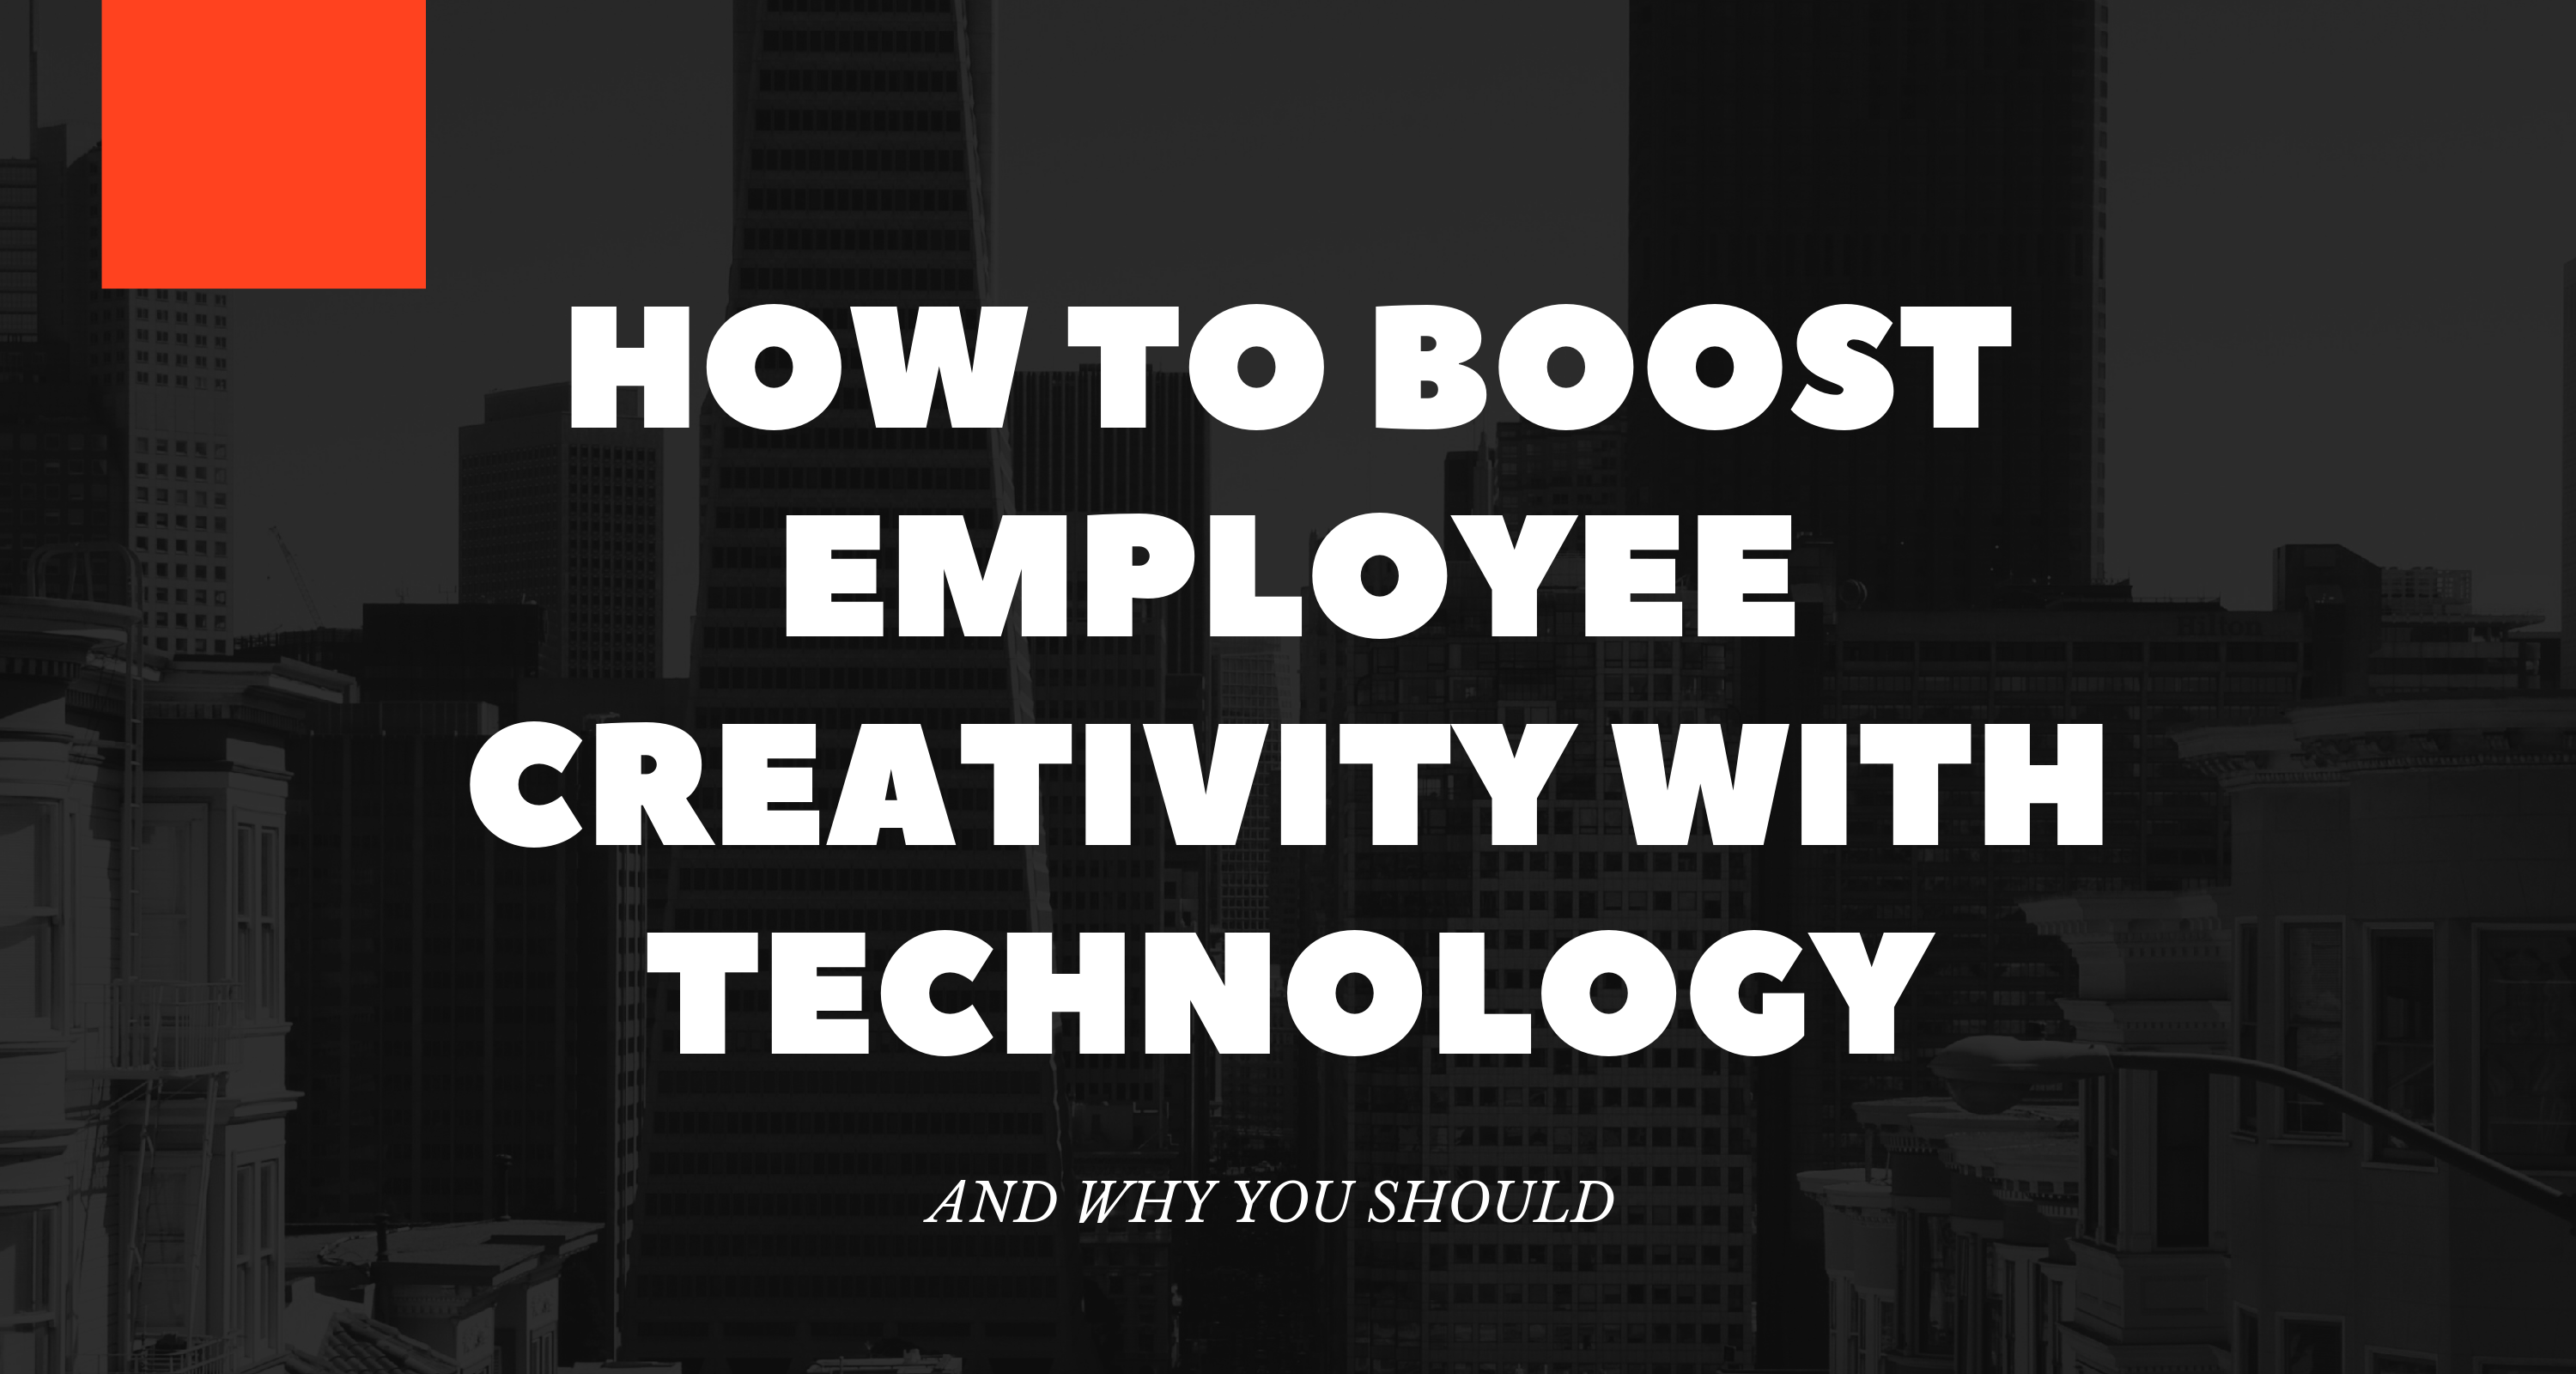 How to Boost Employee Creativity with Technology and Why You Should